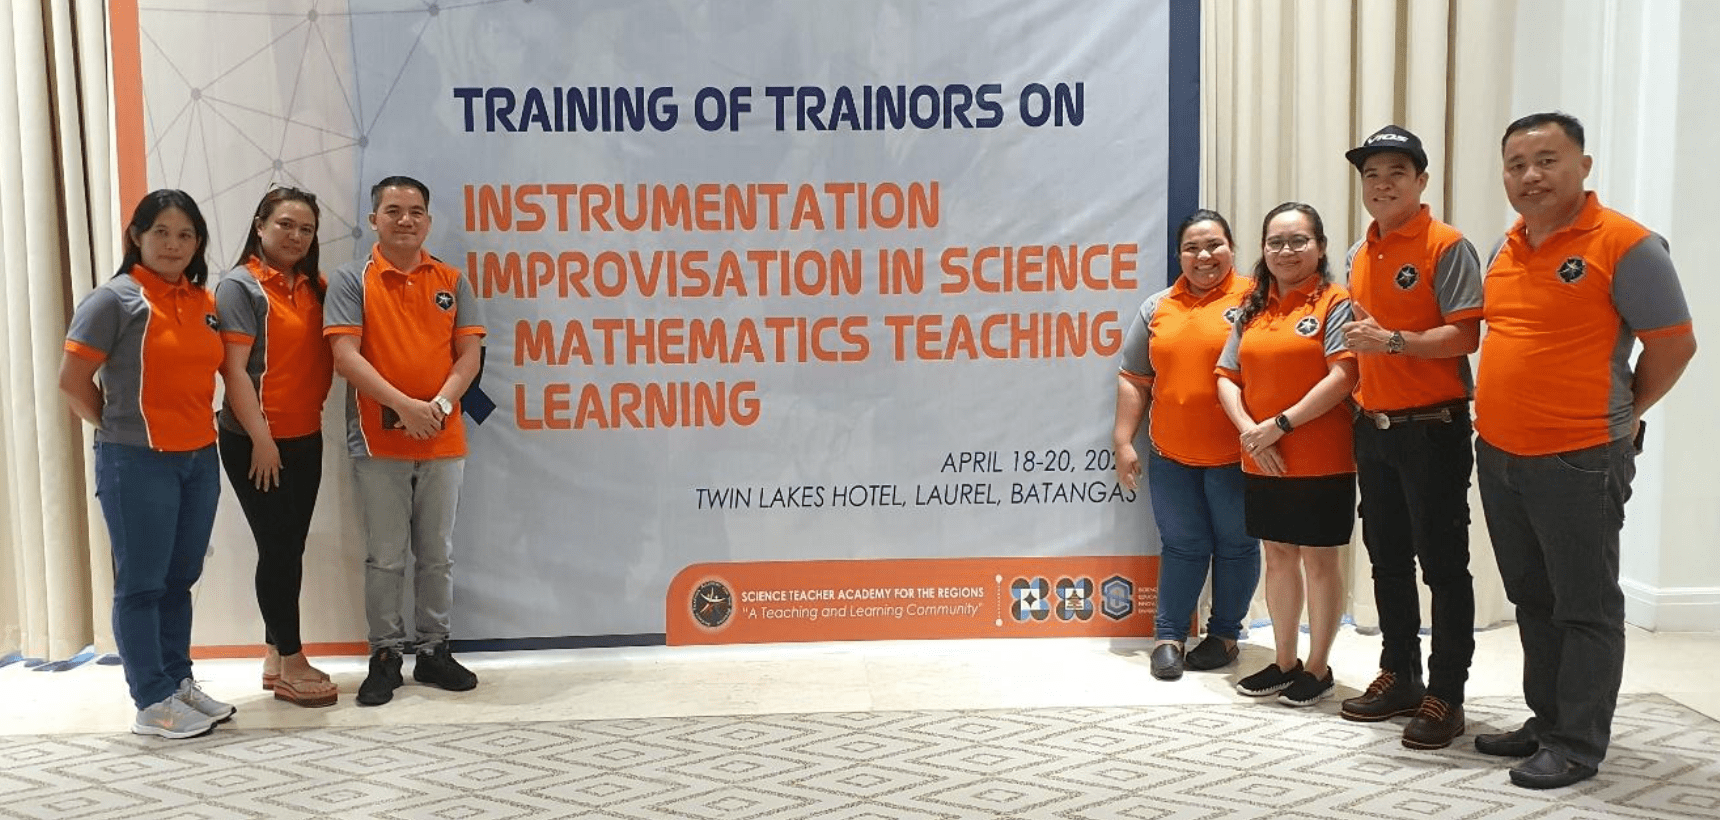 SLU Faculty joins the National Training of Trainers of DOST-SEI Science Teacher Academy for the Regions